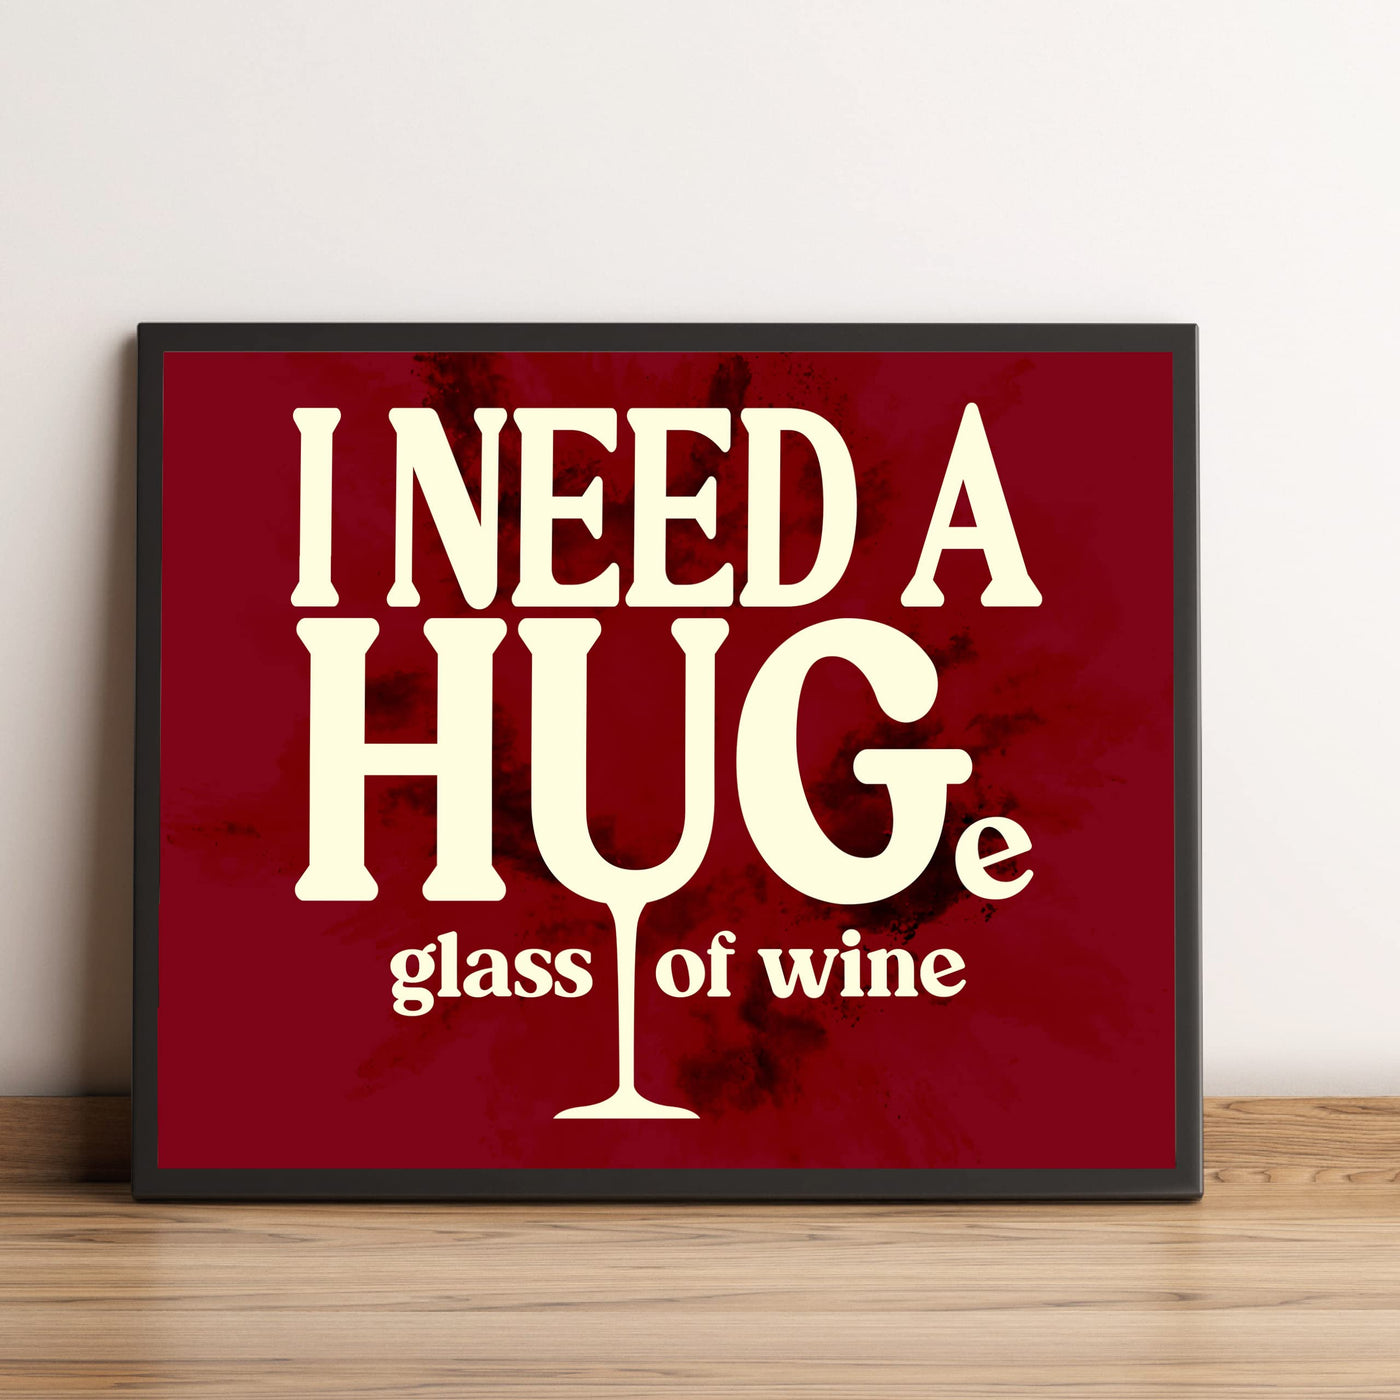 I Need a HUGe Glass of Wine Funny Wall Decor Sign -10 x 8" Modern Kitchen & Dining Wall Art Print -Ready to Frame. Humorous Decoration for Home-Office-Bar-Cave Decor. Fun Gift for All Wine Lovers!